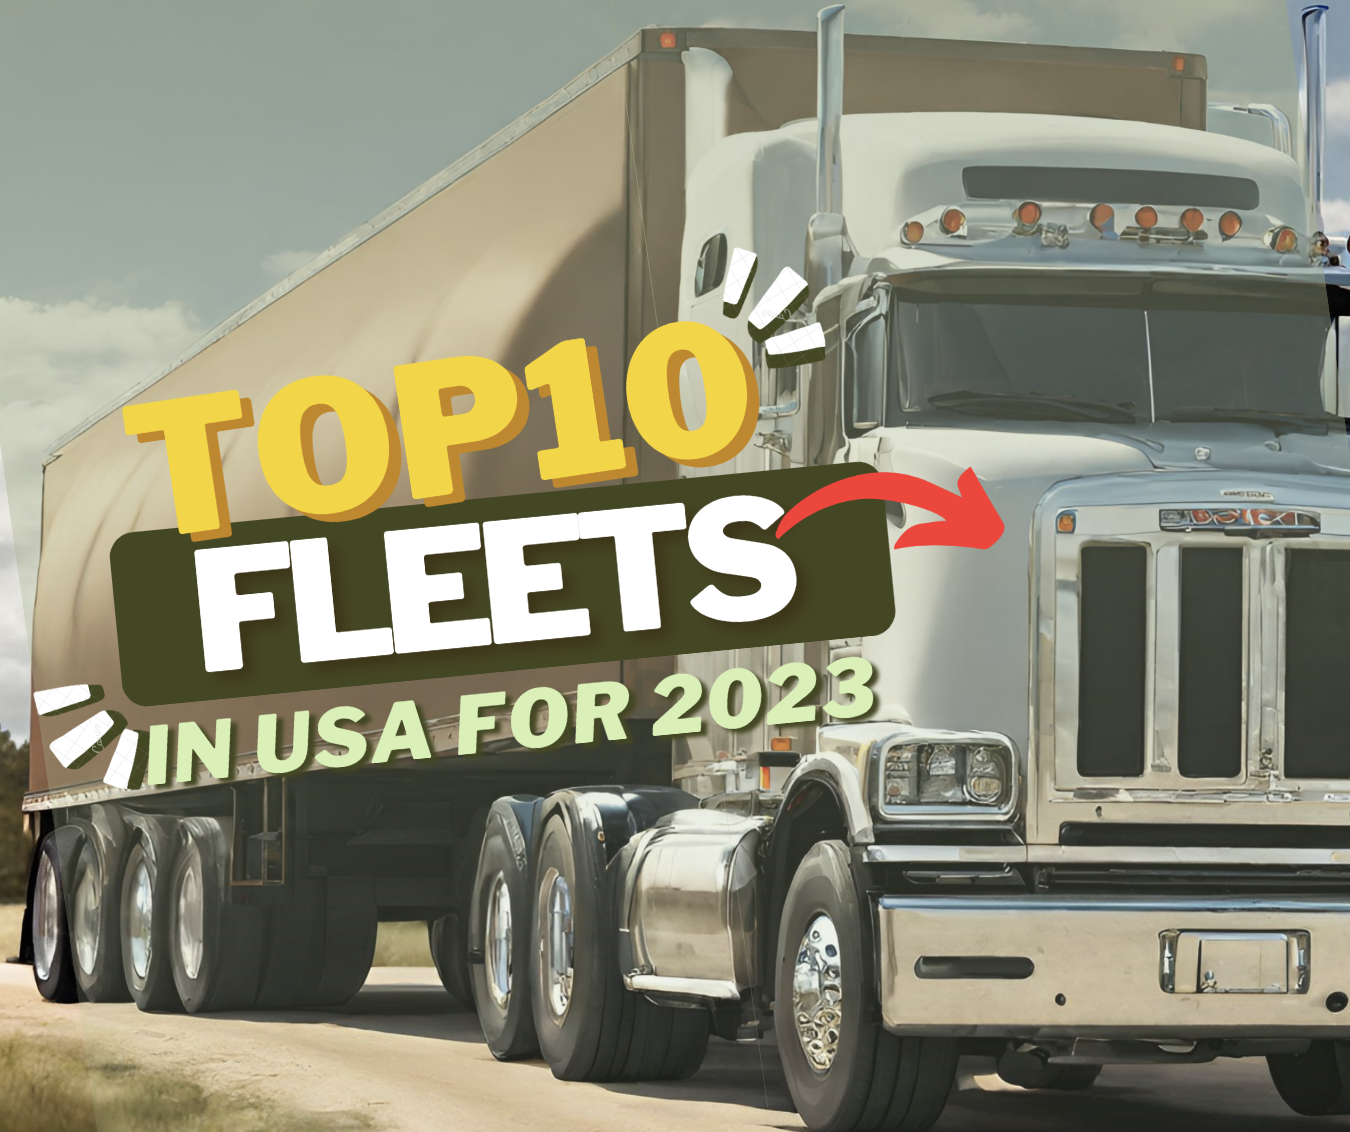 top 10 fleets in usa for 2023